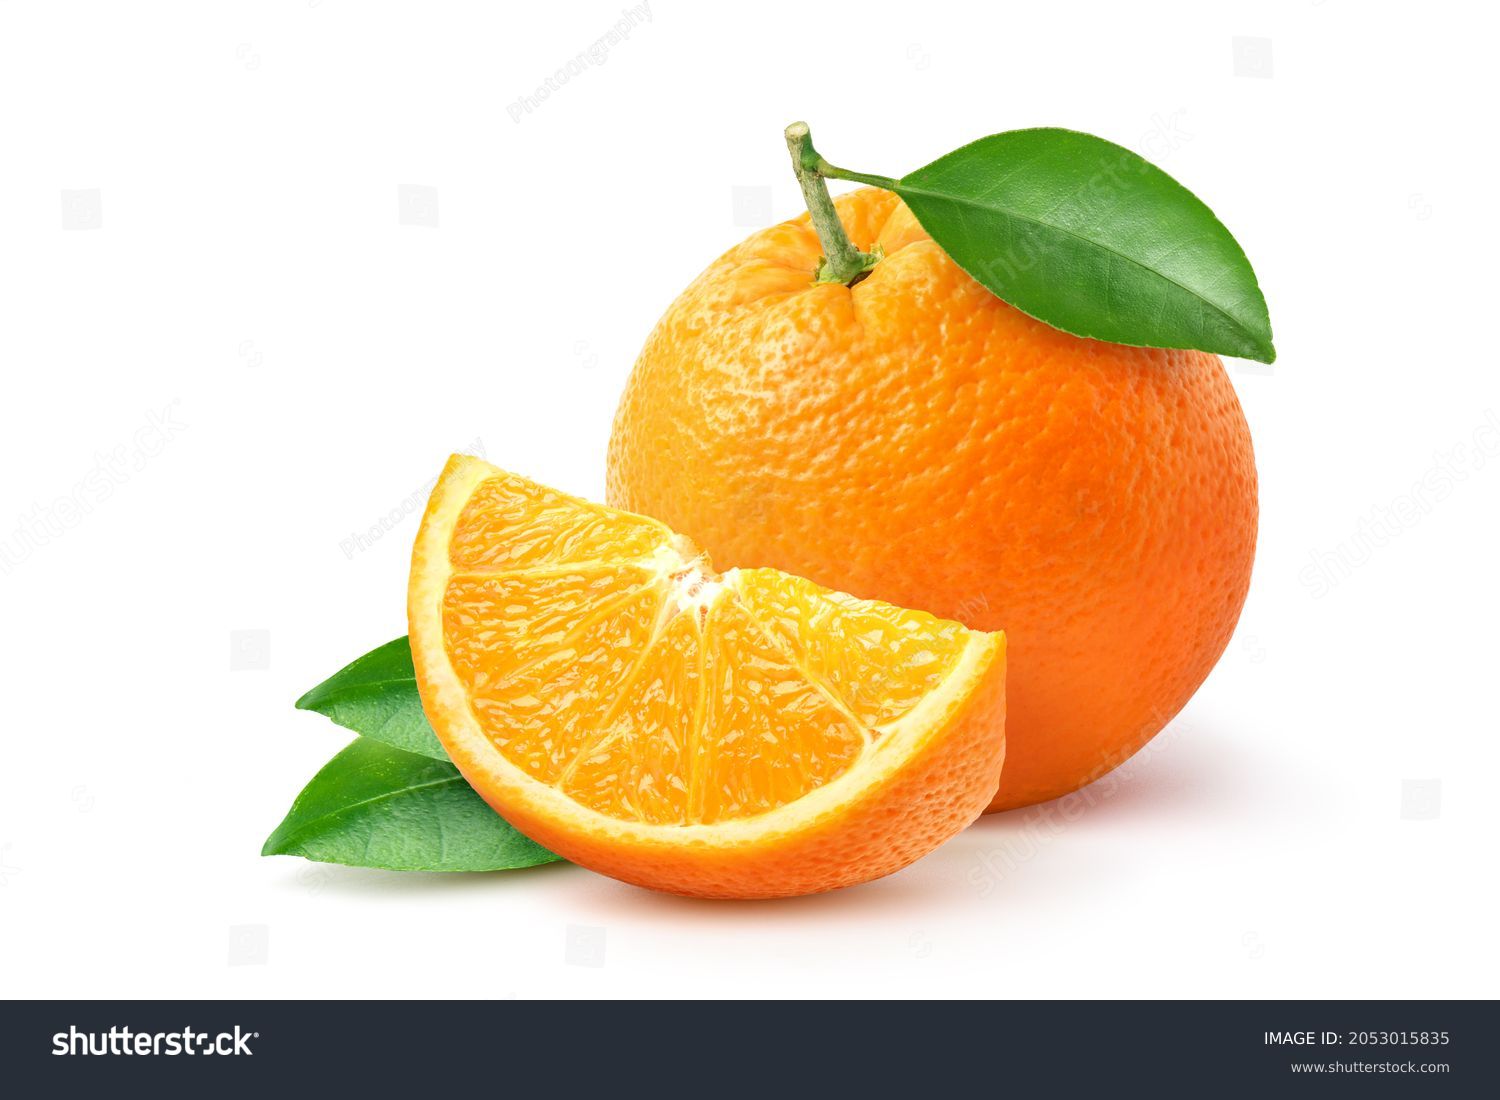 Orange  with sliced and green leaves isolated on white background.  #2053015835